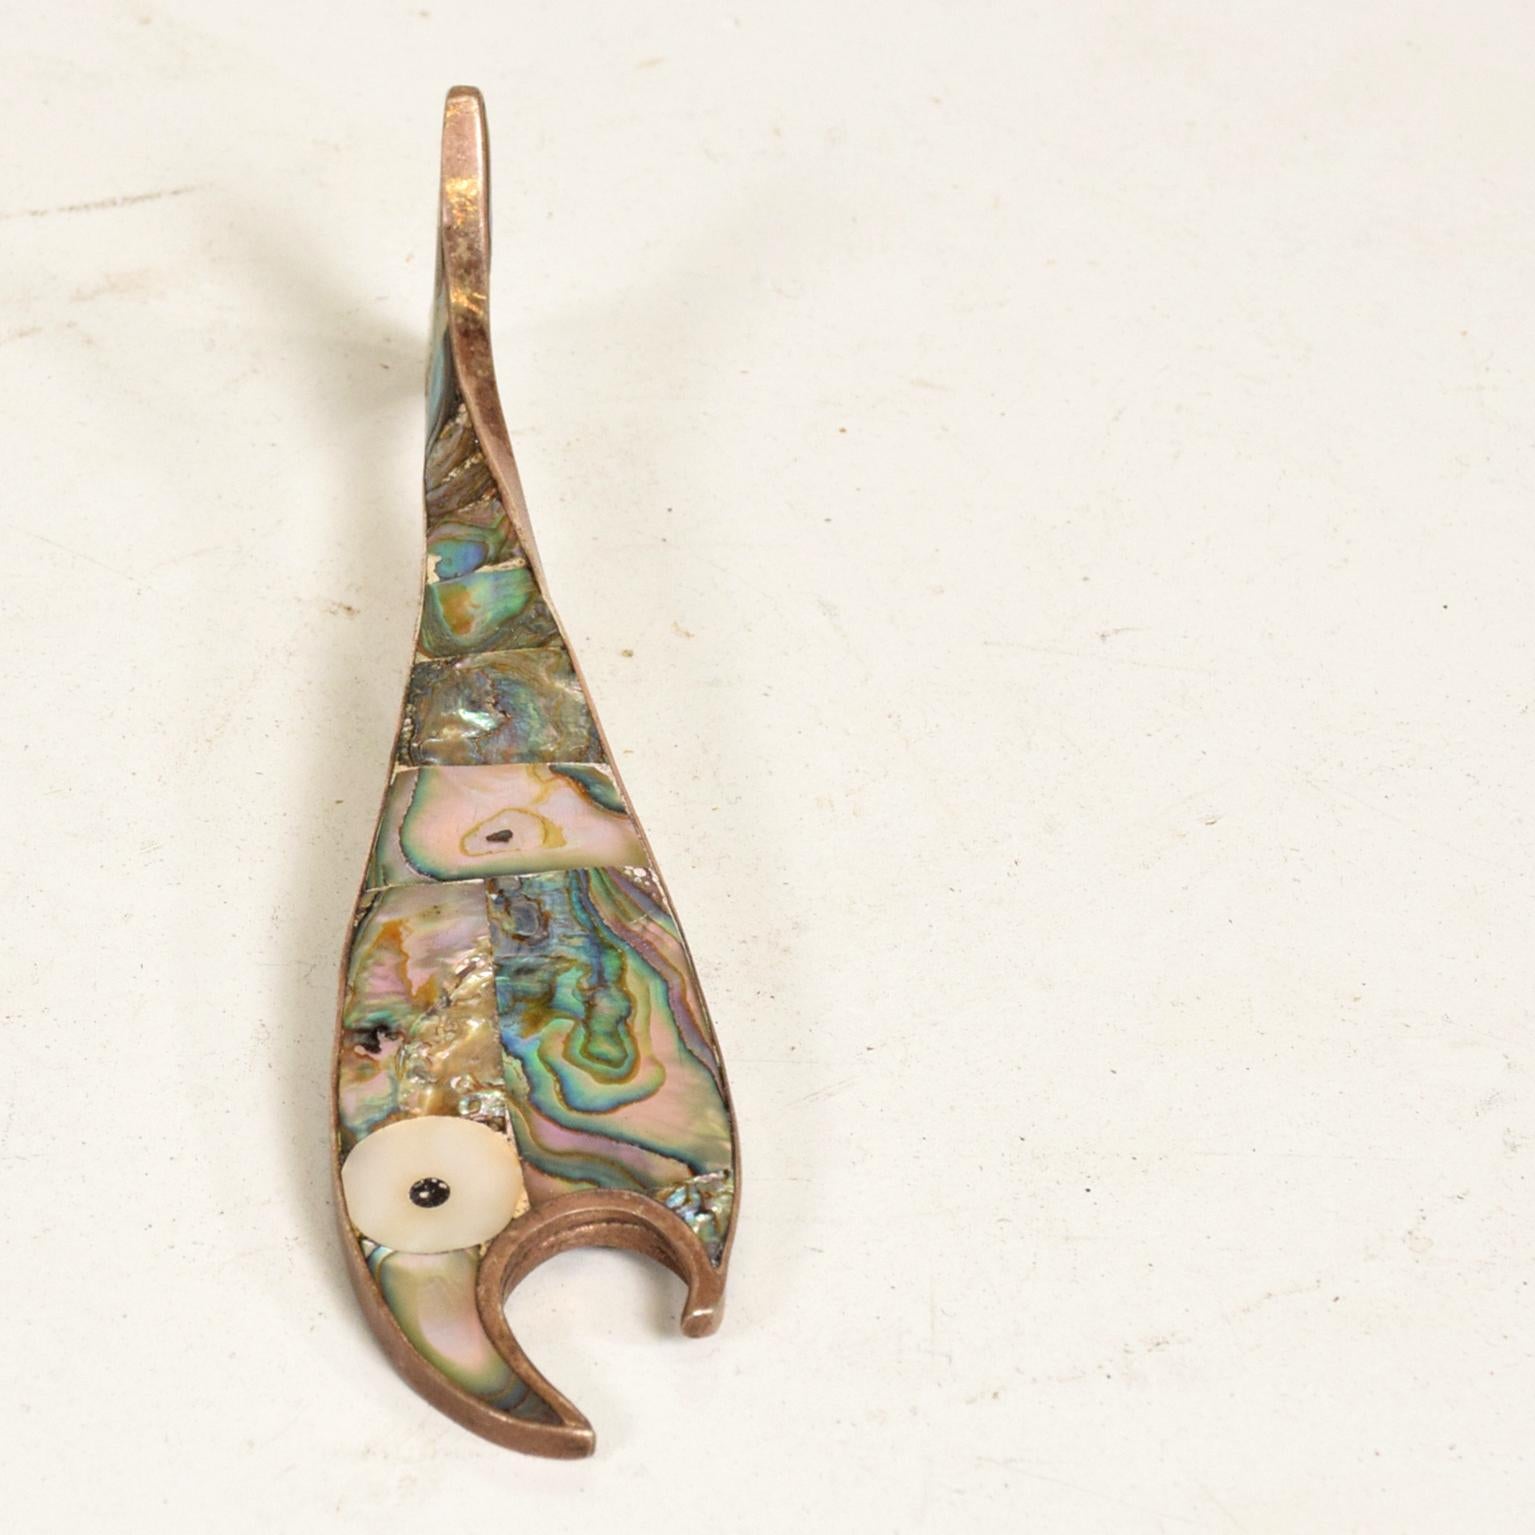 For your consideration, a fish bottle opener abalone. Made in Mexico circa the 1970s. Attributed to Los Castillo. Unmarked.

The bottle opener is a single piece with a twisted fin at the end. Beautiful sculptural shape and nicely decorated with